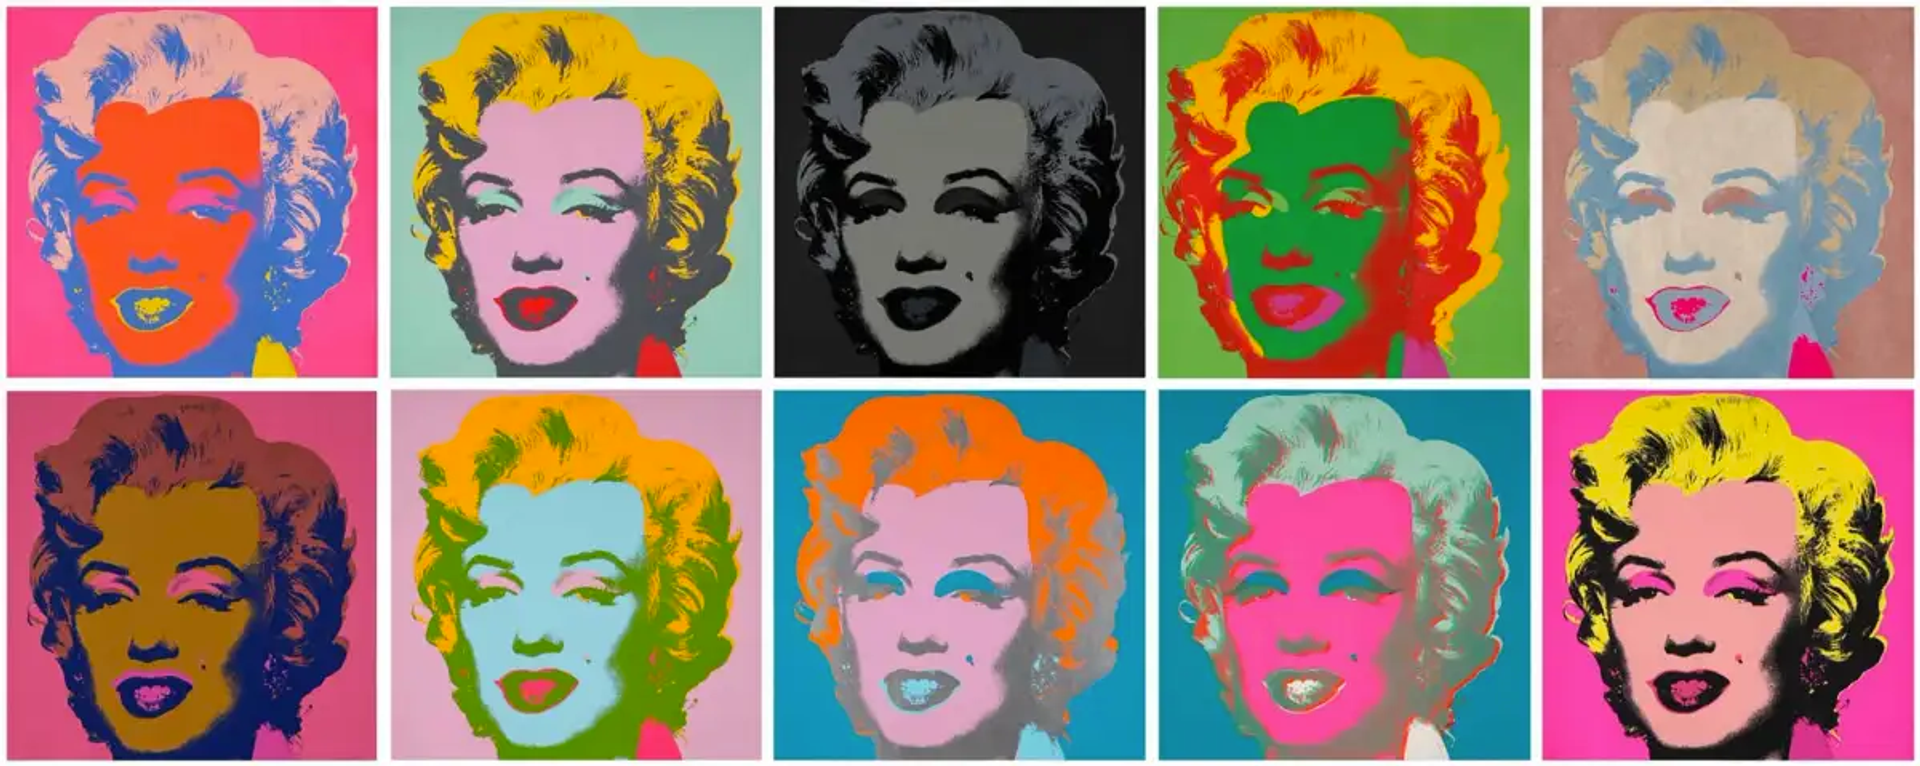 An image of the complete set of Marilyn Monroe's prints by Andy Warhol. The actress is shown gazing seductively at the viewer, and depicted in a variety of Pop Art bright colours.